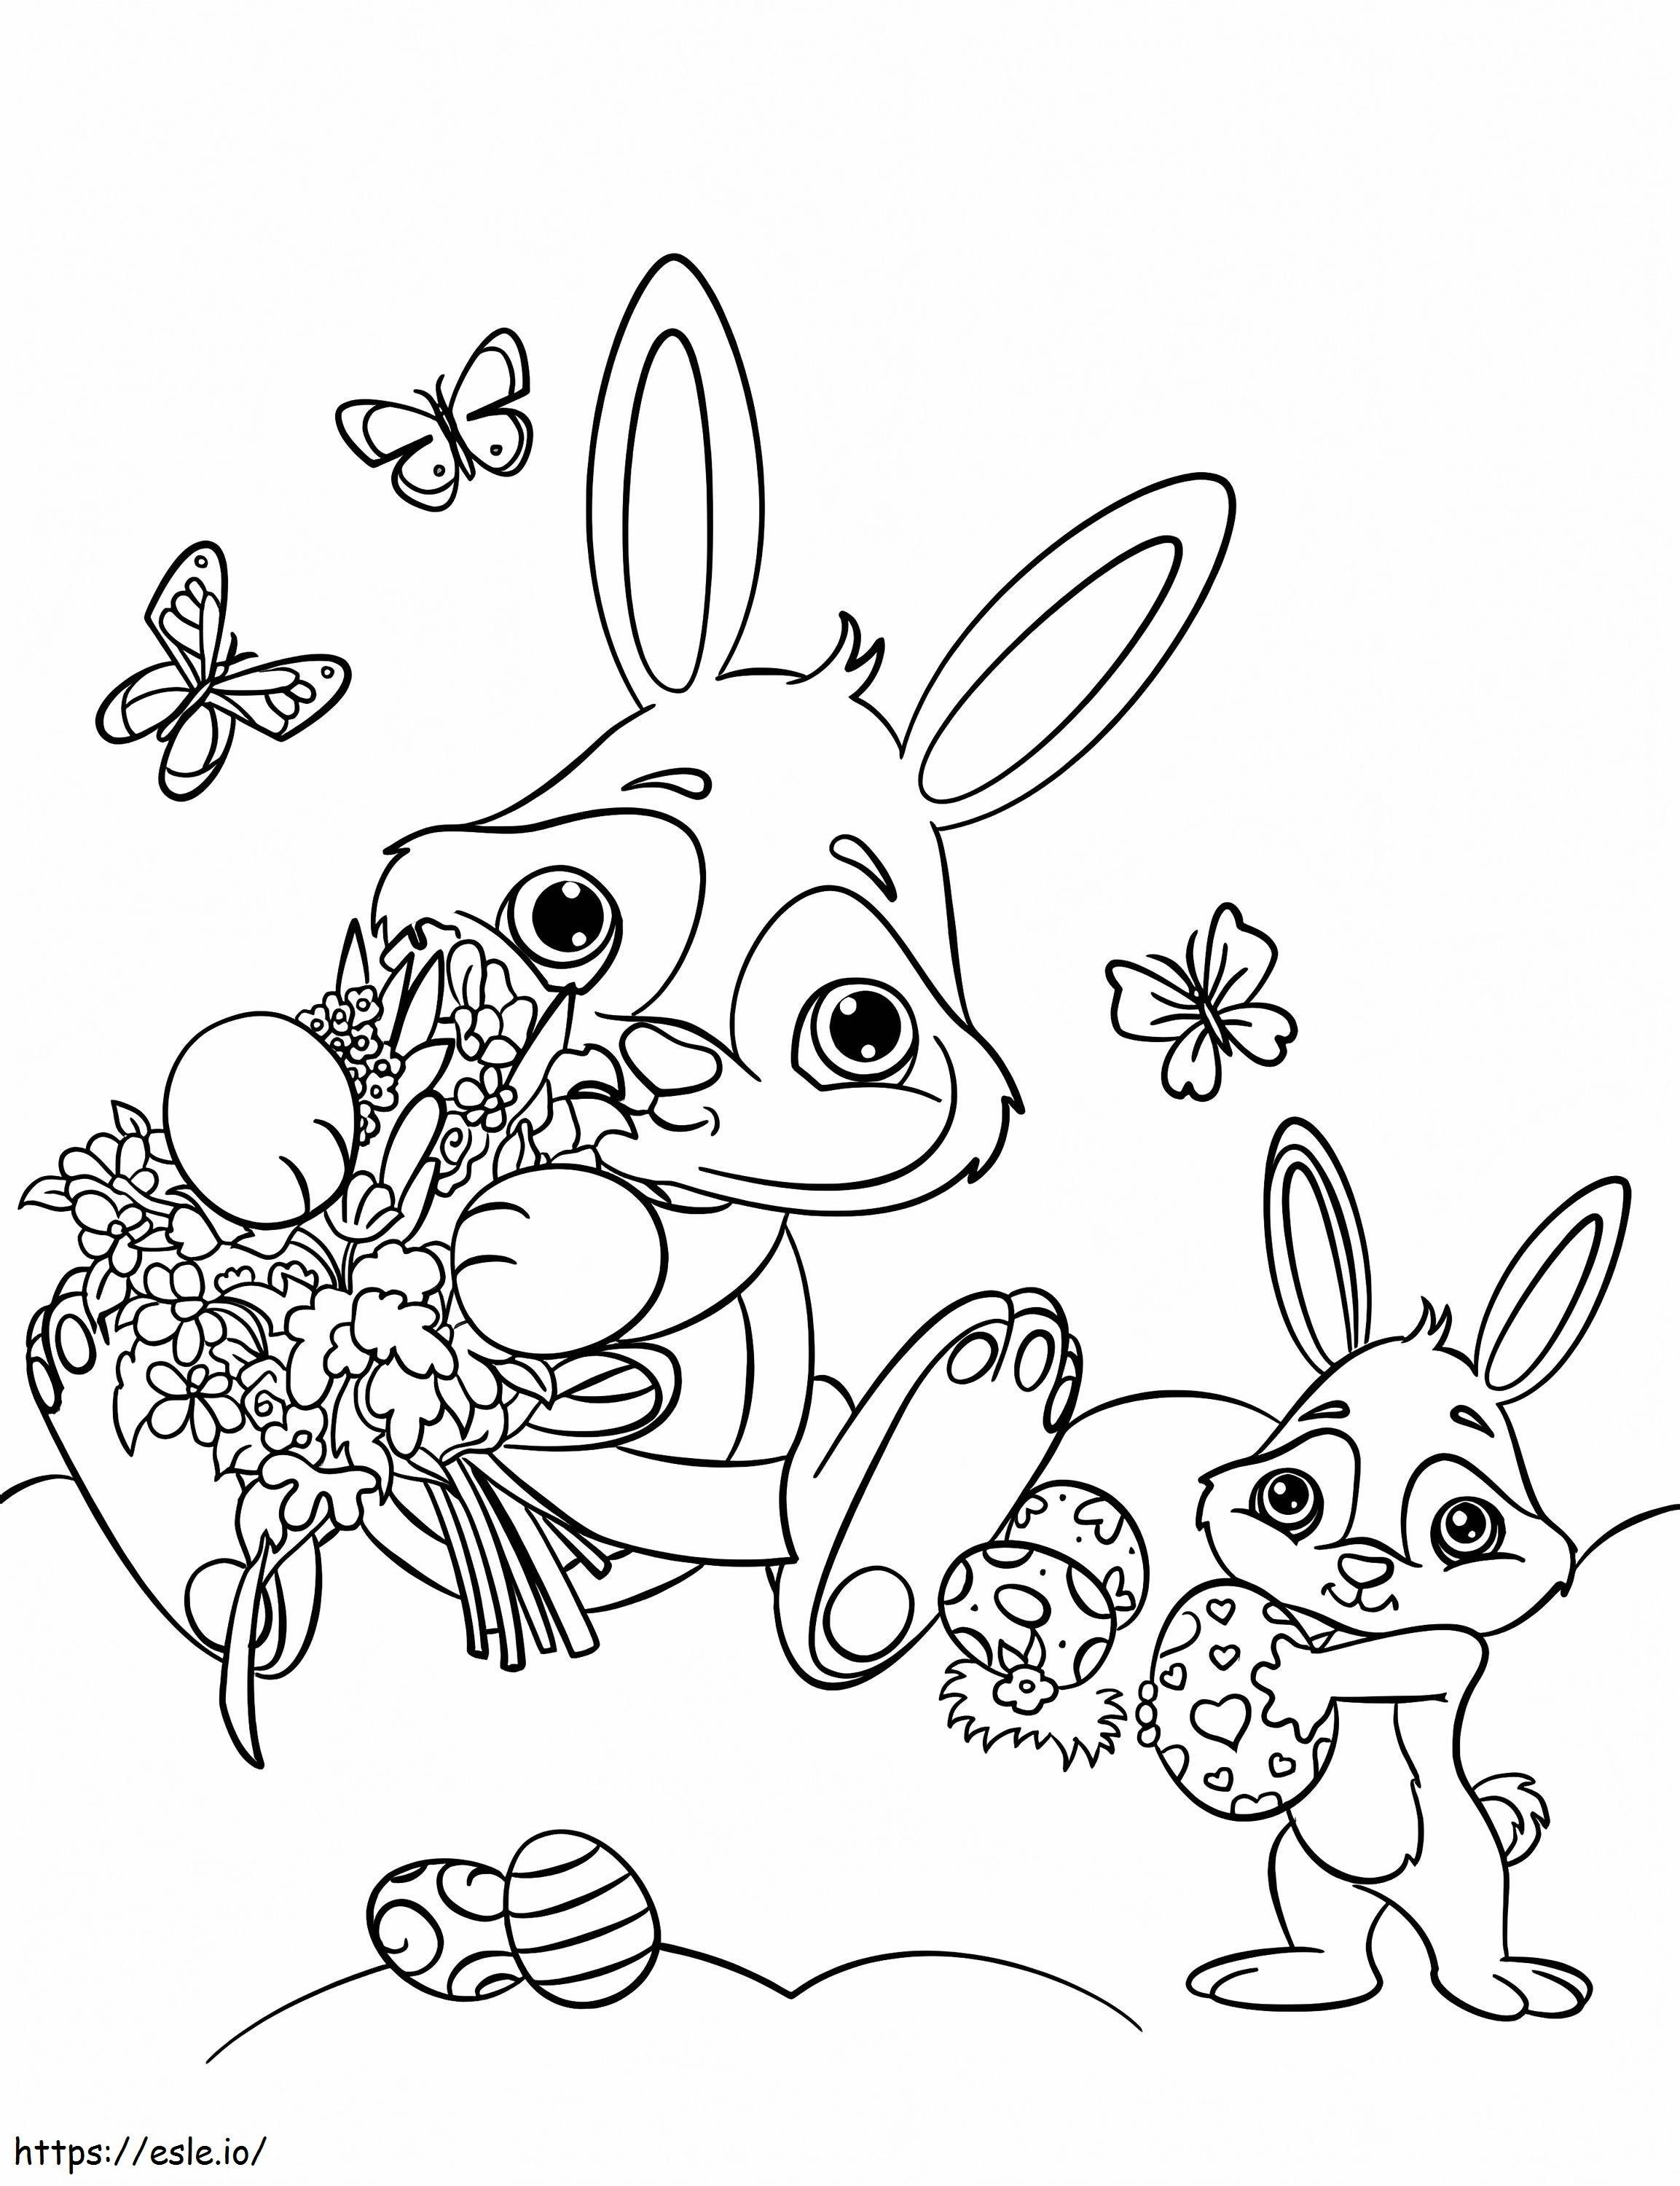 Happy Easter Bunnies coloring page